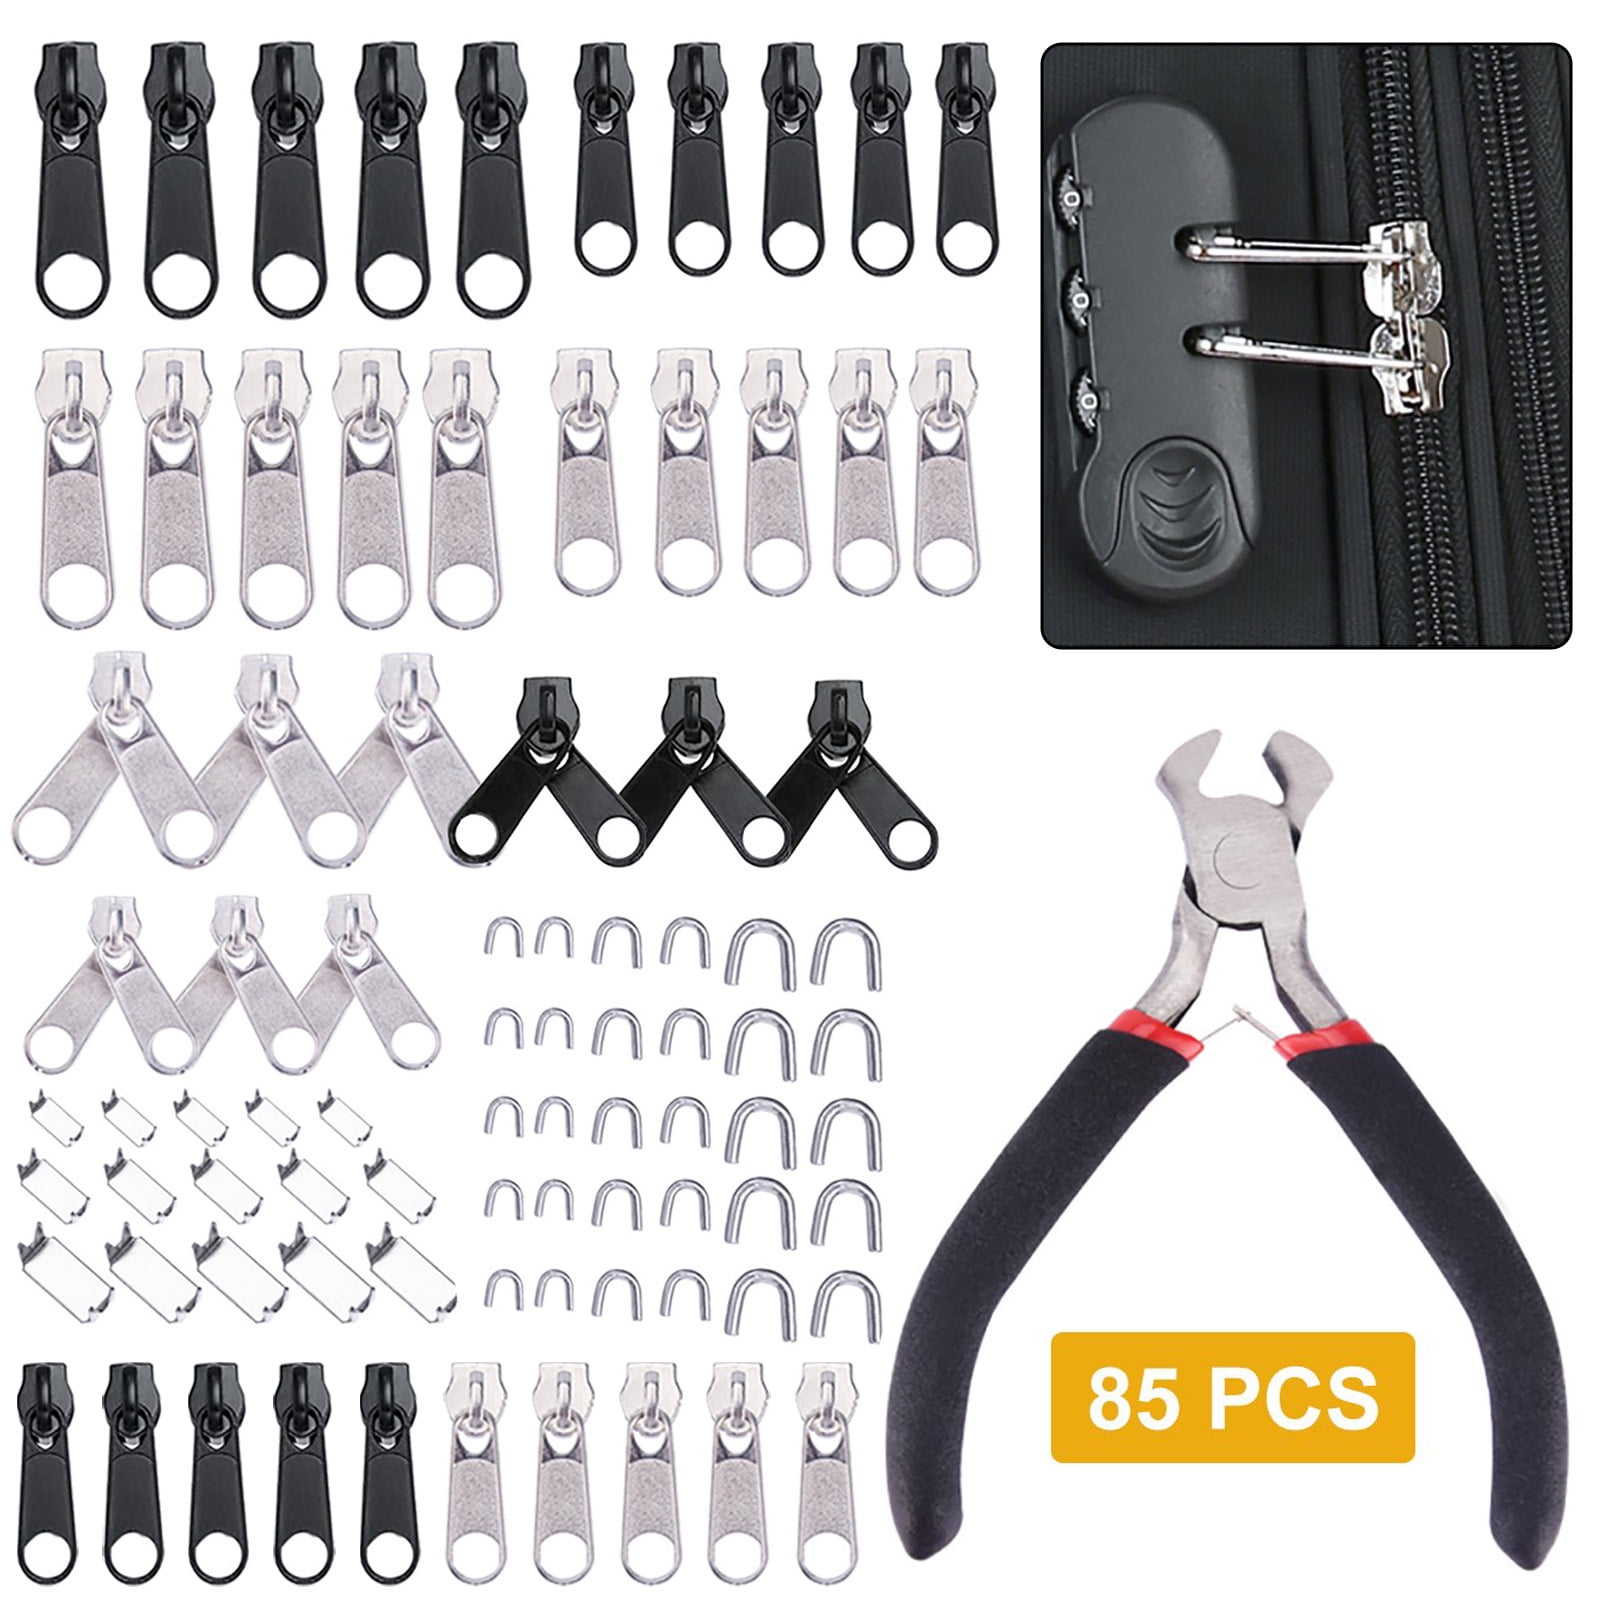 255 Pcs Zipper Repair Kit Replacement Zipper Set Zipper Pull and Tabs and Installation Tools for Bags Tents Luggage Sleeping Bag Clothes Suitcase Backpack DIY Craft 3 Styles 